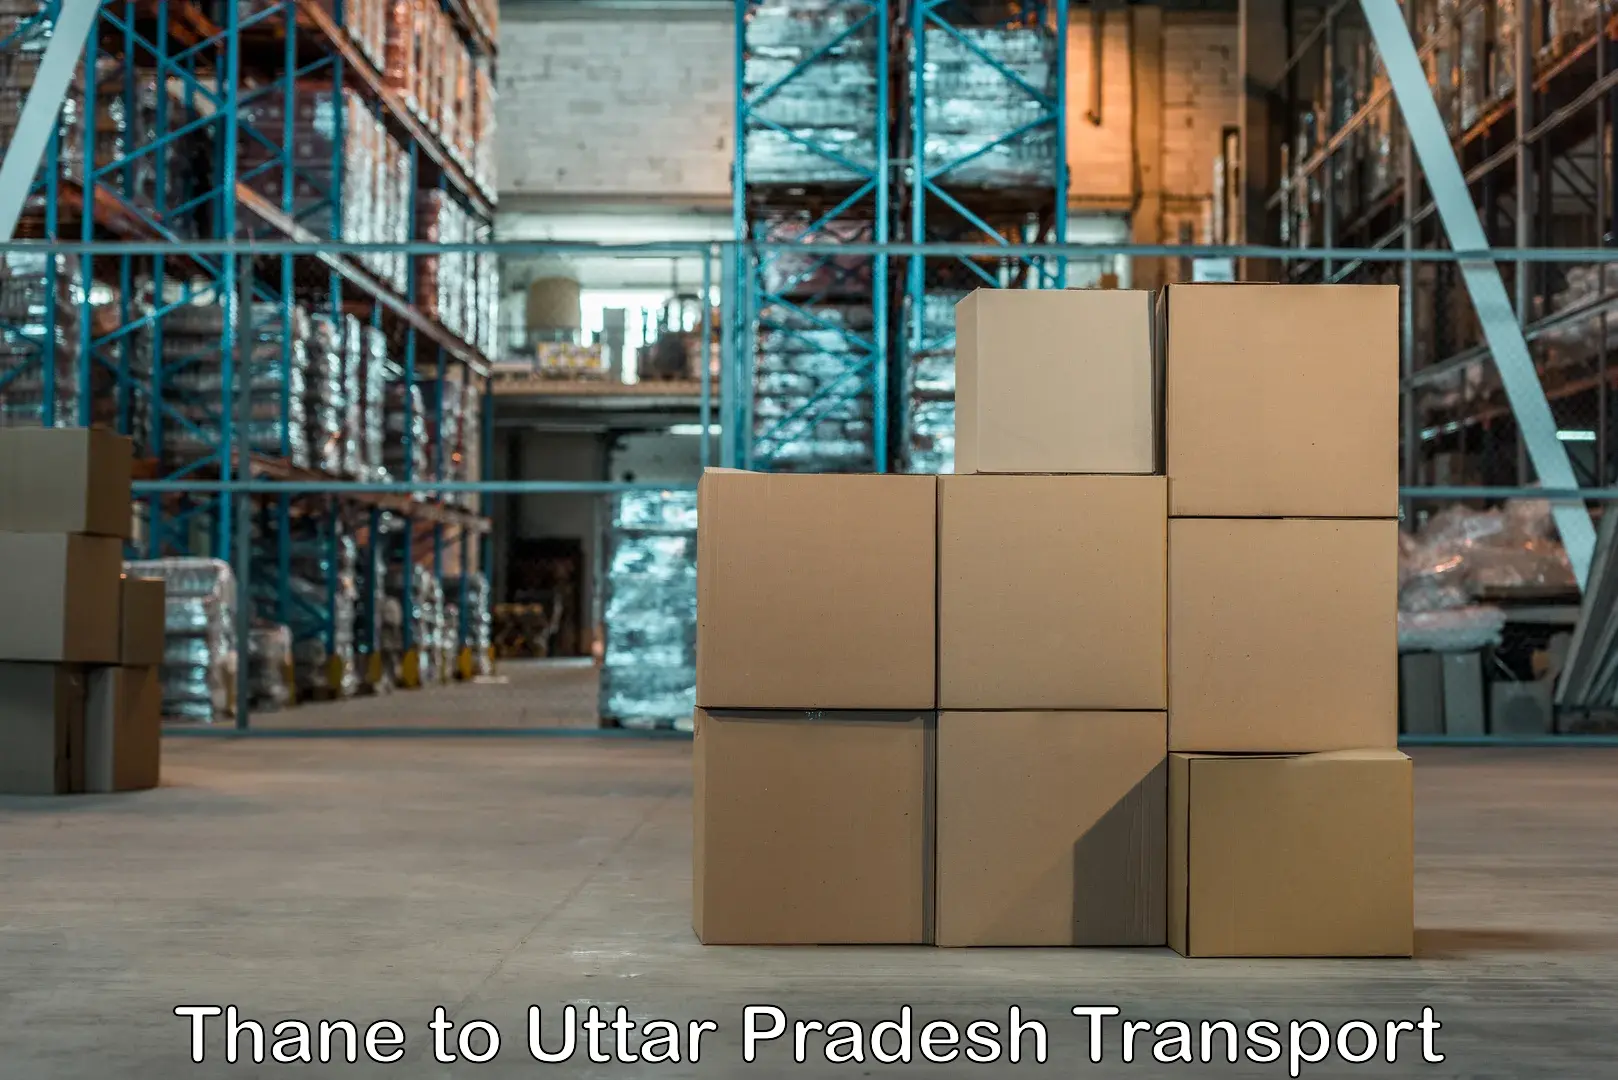 Express transport services Thane to Amethi